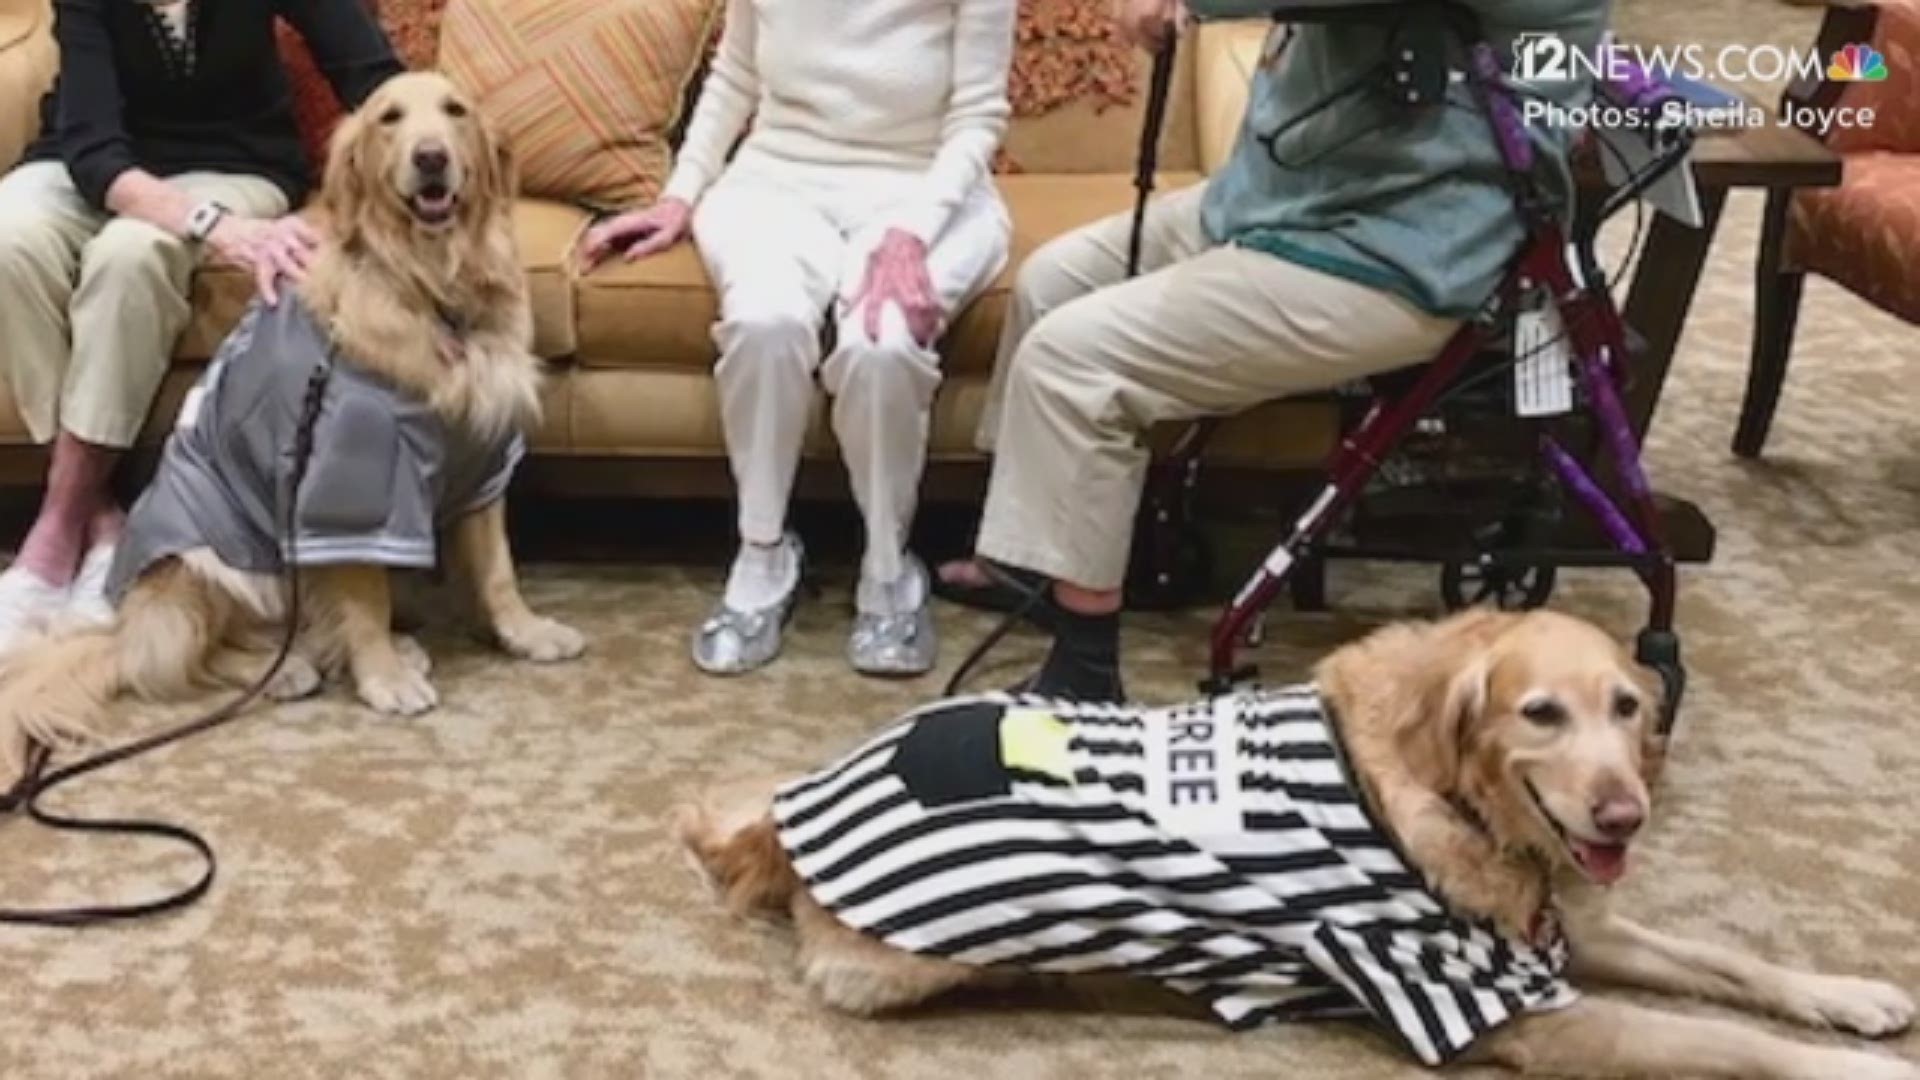 The two golden retrievers are the furkids of Sheila Joyce, a Valley woman whose kind heart might be just as big as the ones seniors in Sun City have come to know in her happy pups.